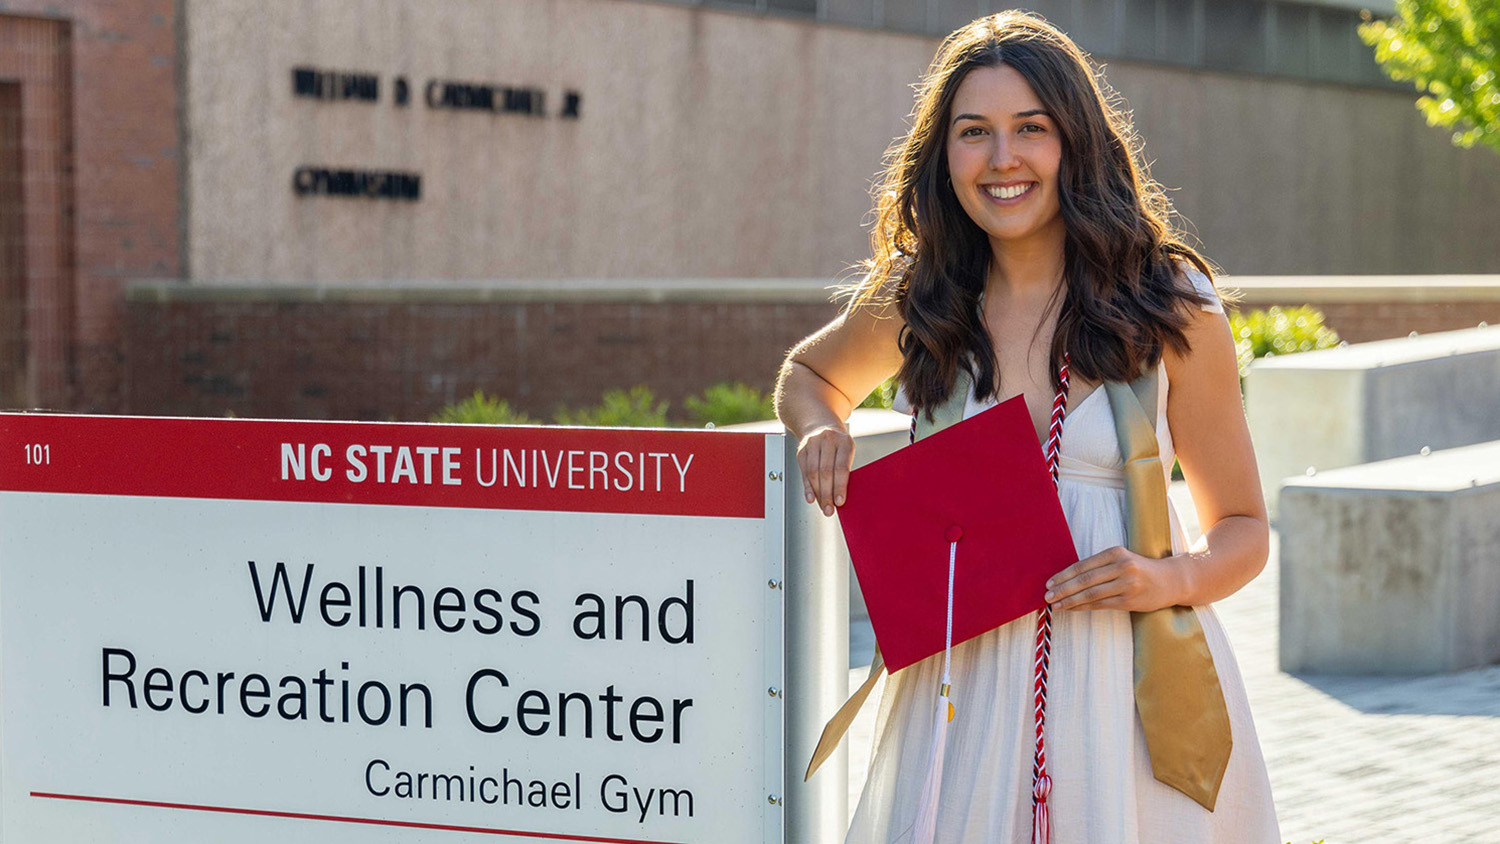 Julia Egler holding her garduation cap while posing beside the NC State Wellness and Recreation Center entrance sign.